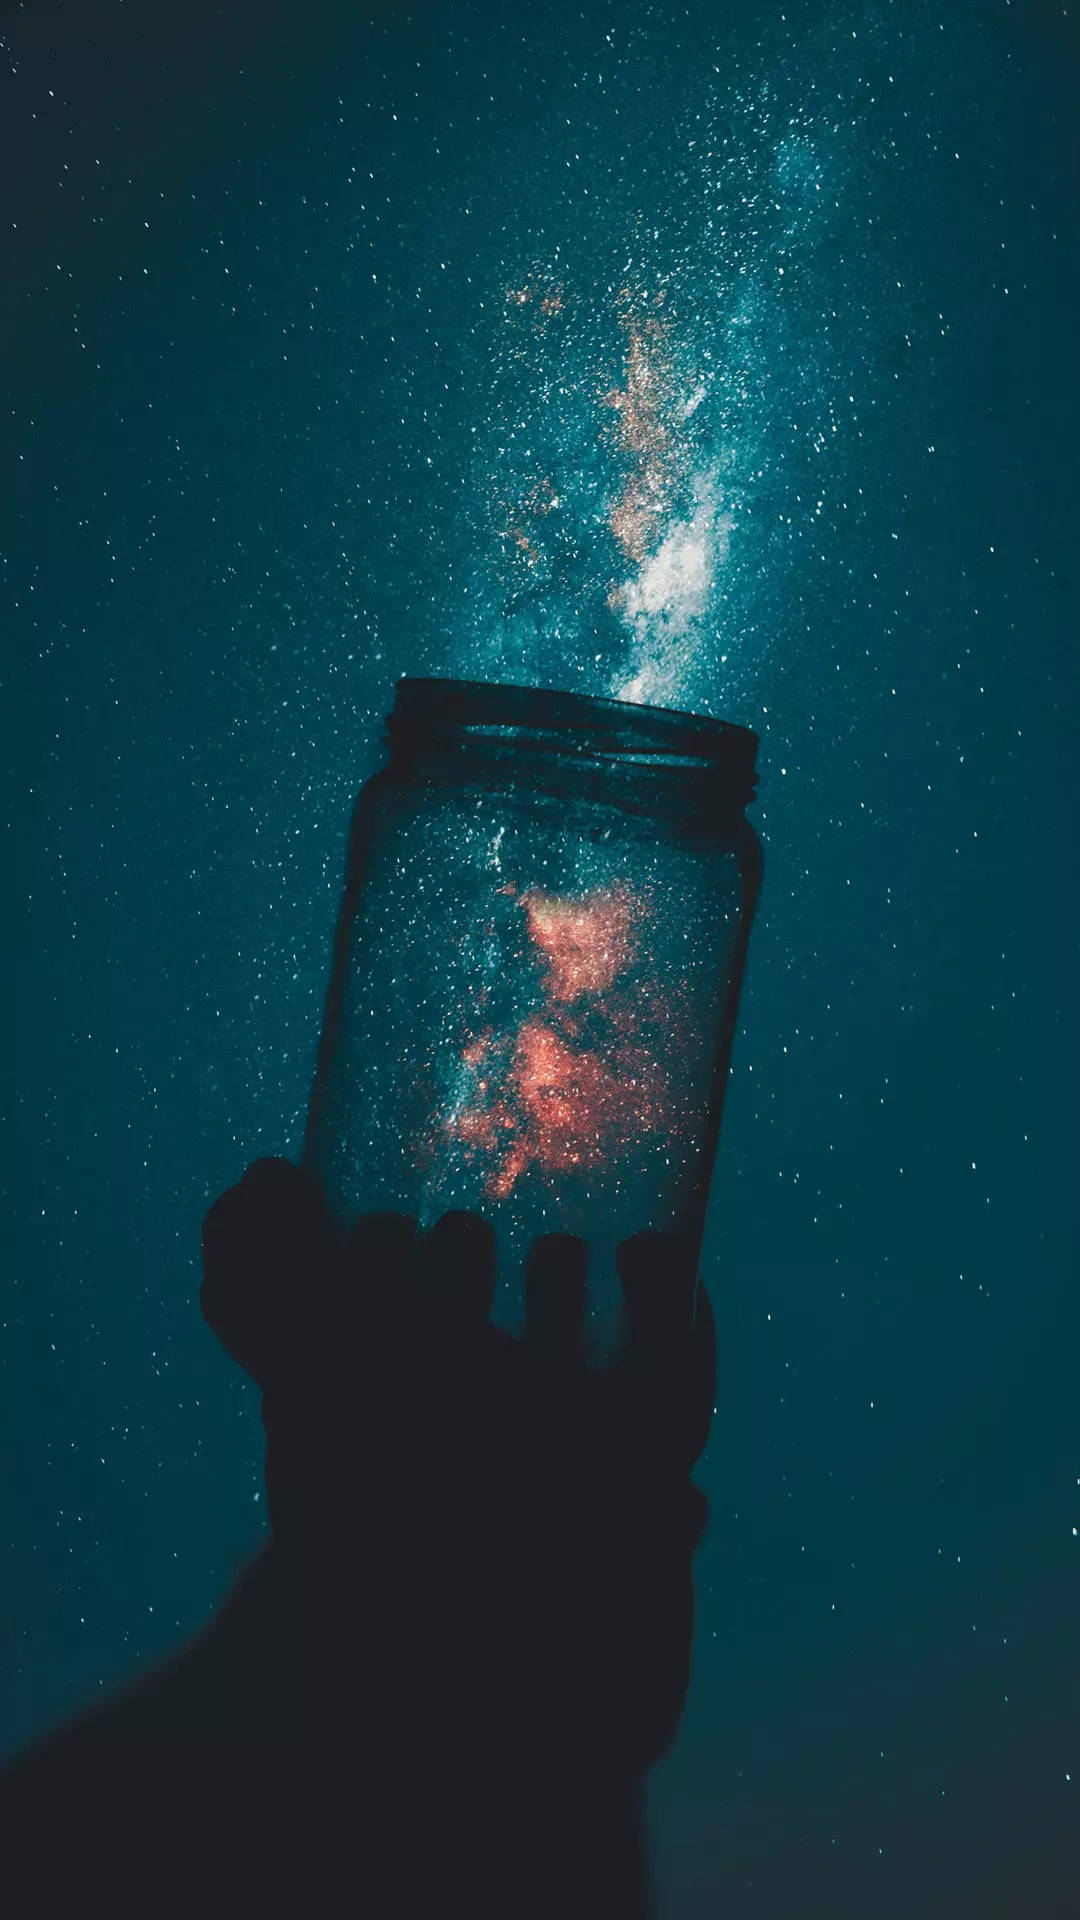 A hand holding up an empty jar with stars in the background - Teal